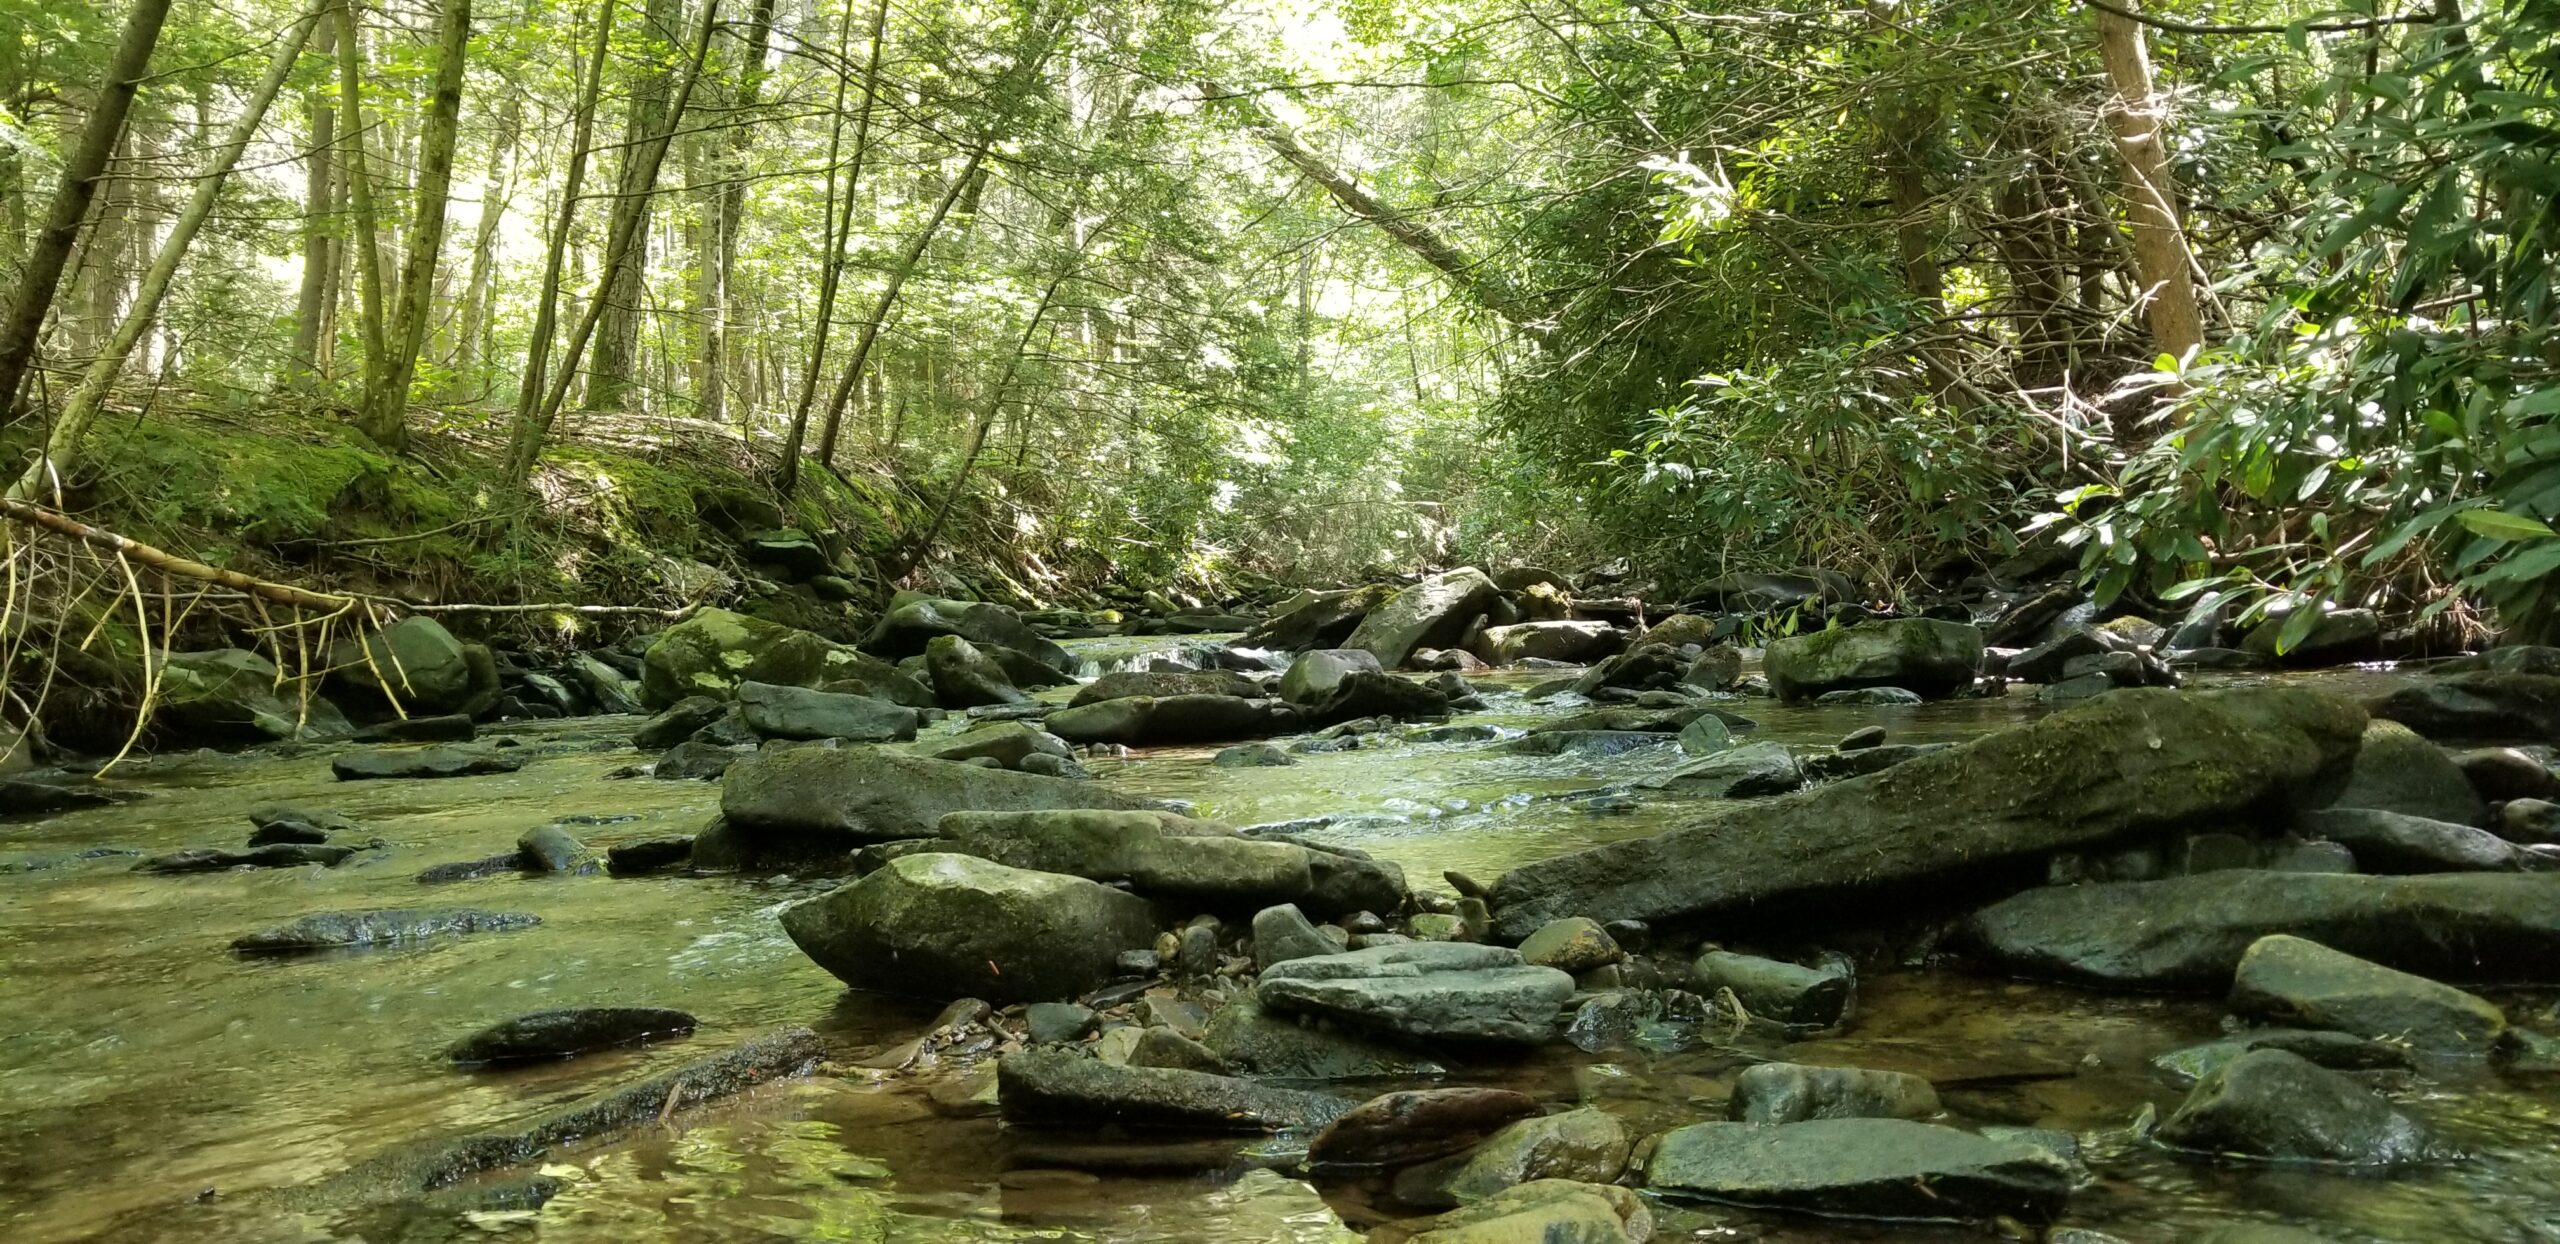 A water-level view of a small rocky stream with trees on the shores